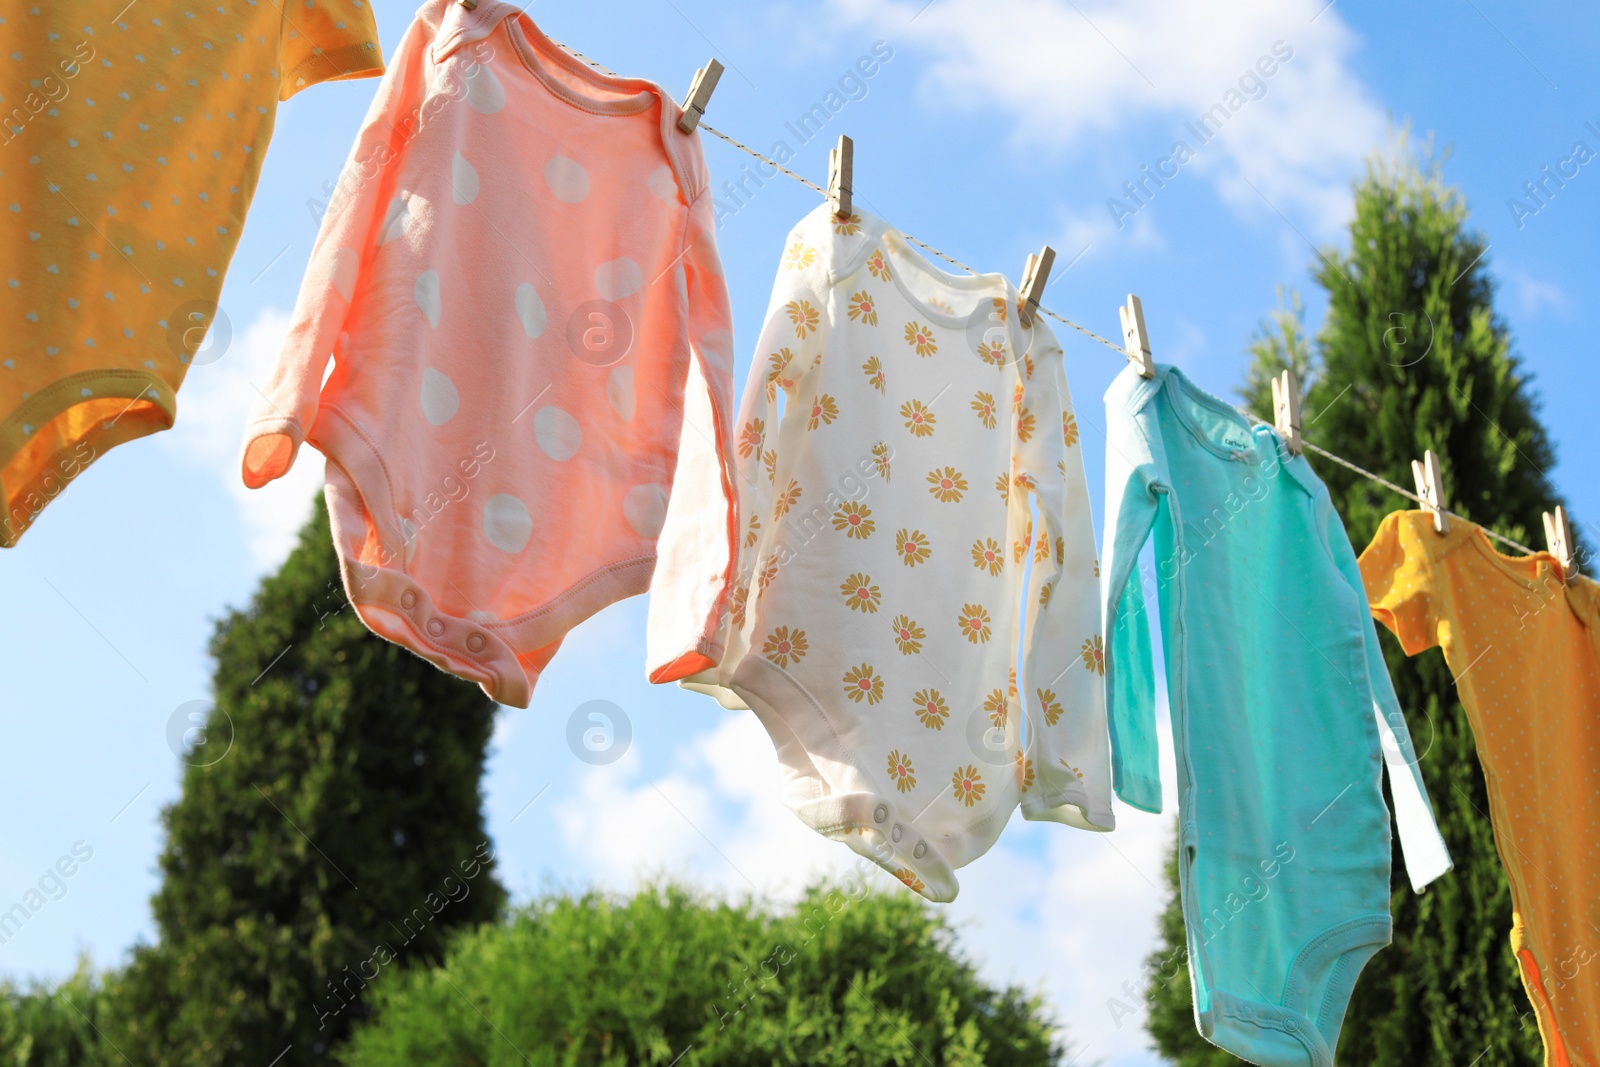 Photo of Clean baby onesies hanging on washing line outdoors. Drying clothes